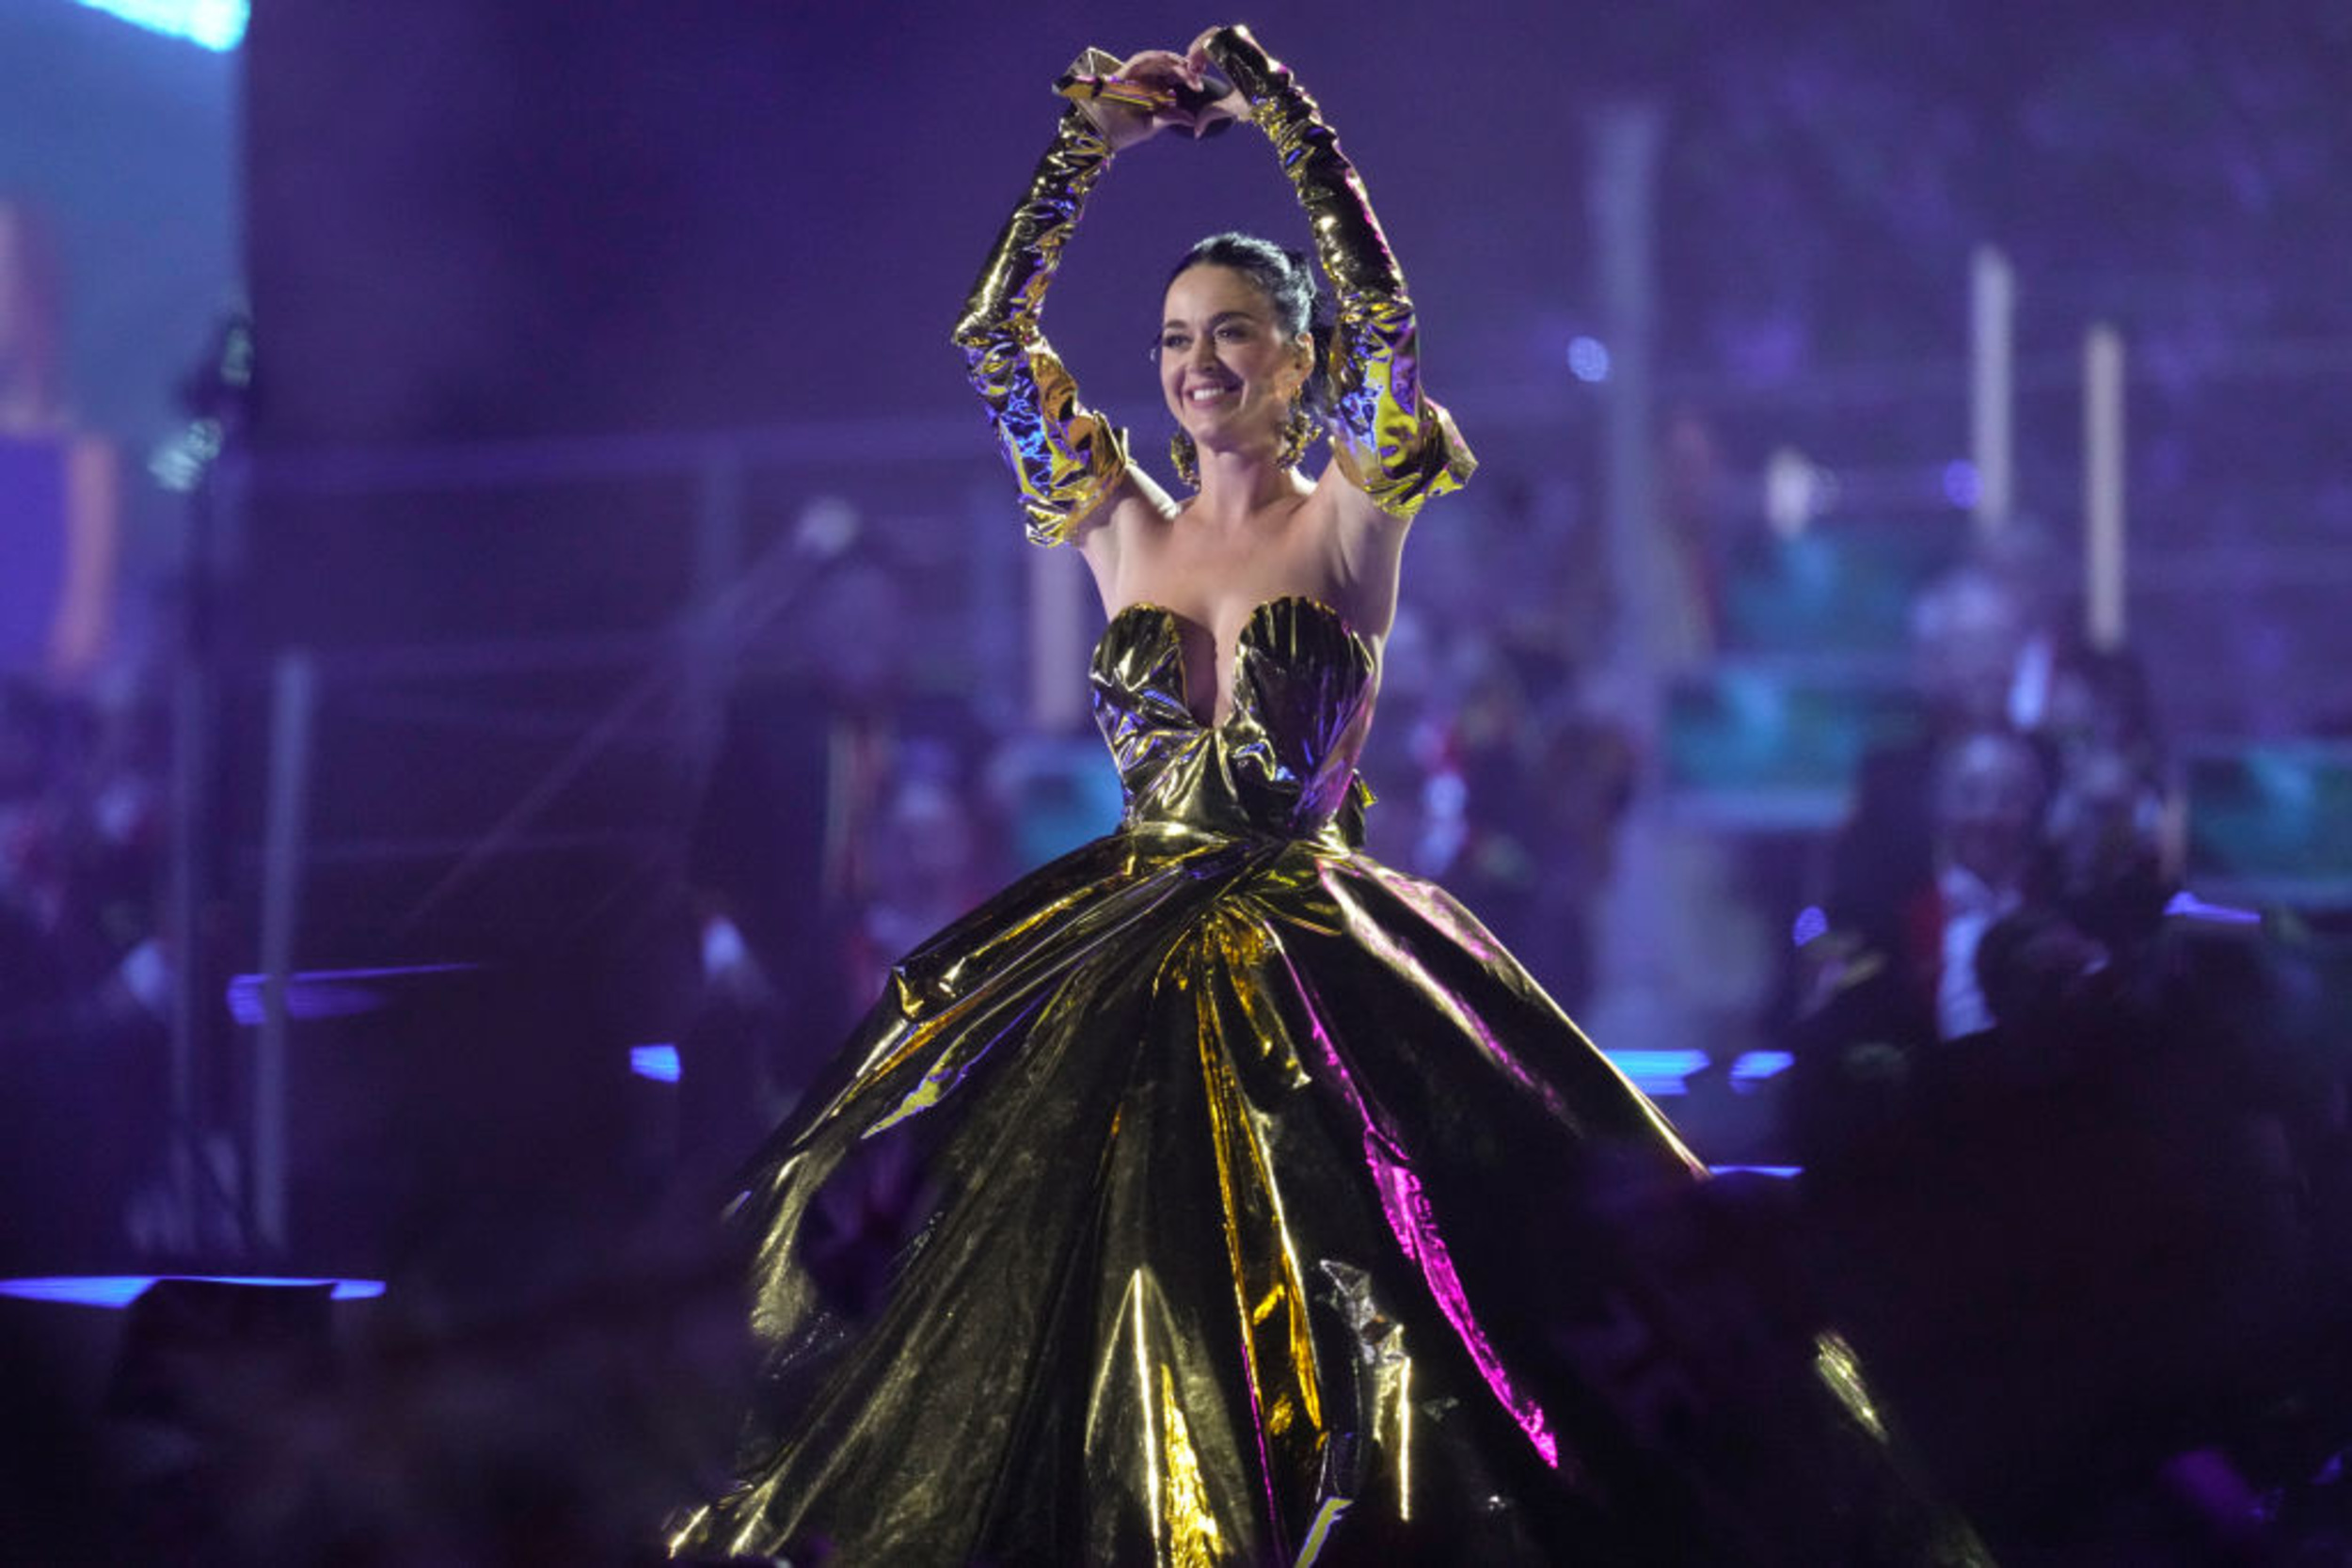 <p>In 2013, pop singer Katy Perry released her fourth album <em>Prism,</em> led by the hit single “Roar.” On the self-empowerment track, Perry asserts herself as a strong person who continues to fight for what she wants and what she believes. As she sings on the hook, “I got the eye of the tiger, a fighter / Dancing through the fire / ‘Cause I am a champion and you’re gonna hear me roar.”</p><p>You may also like: <a href='https://www.yardbarker.com/entertainment/articles/20_of_the_most_popular_country_songs_performed_by_black_musicians_040924/s1__40152816'>20 of the most popular country songs performed by Black musicians</a></p>